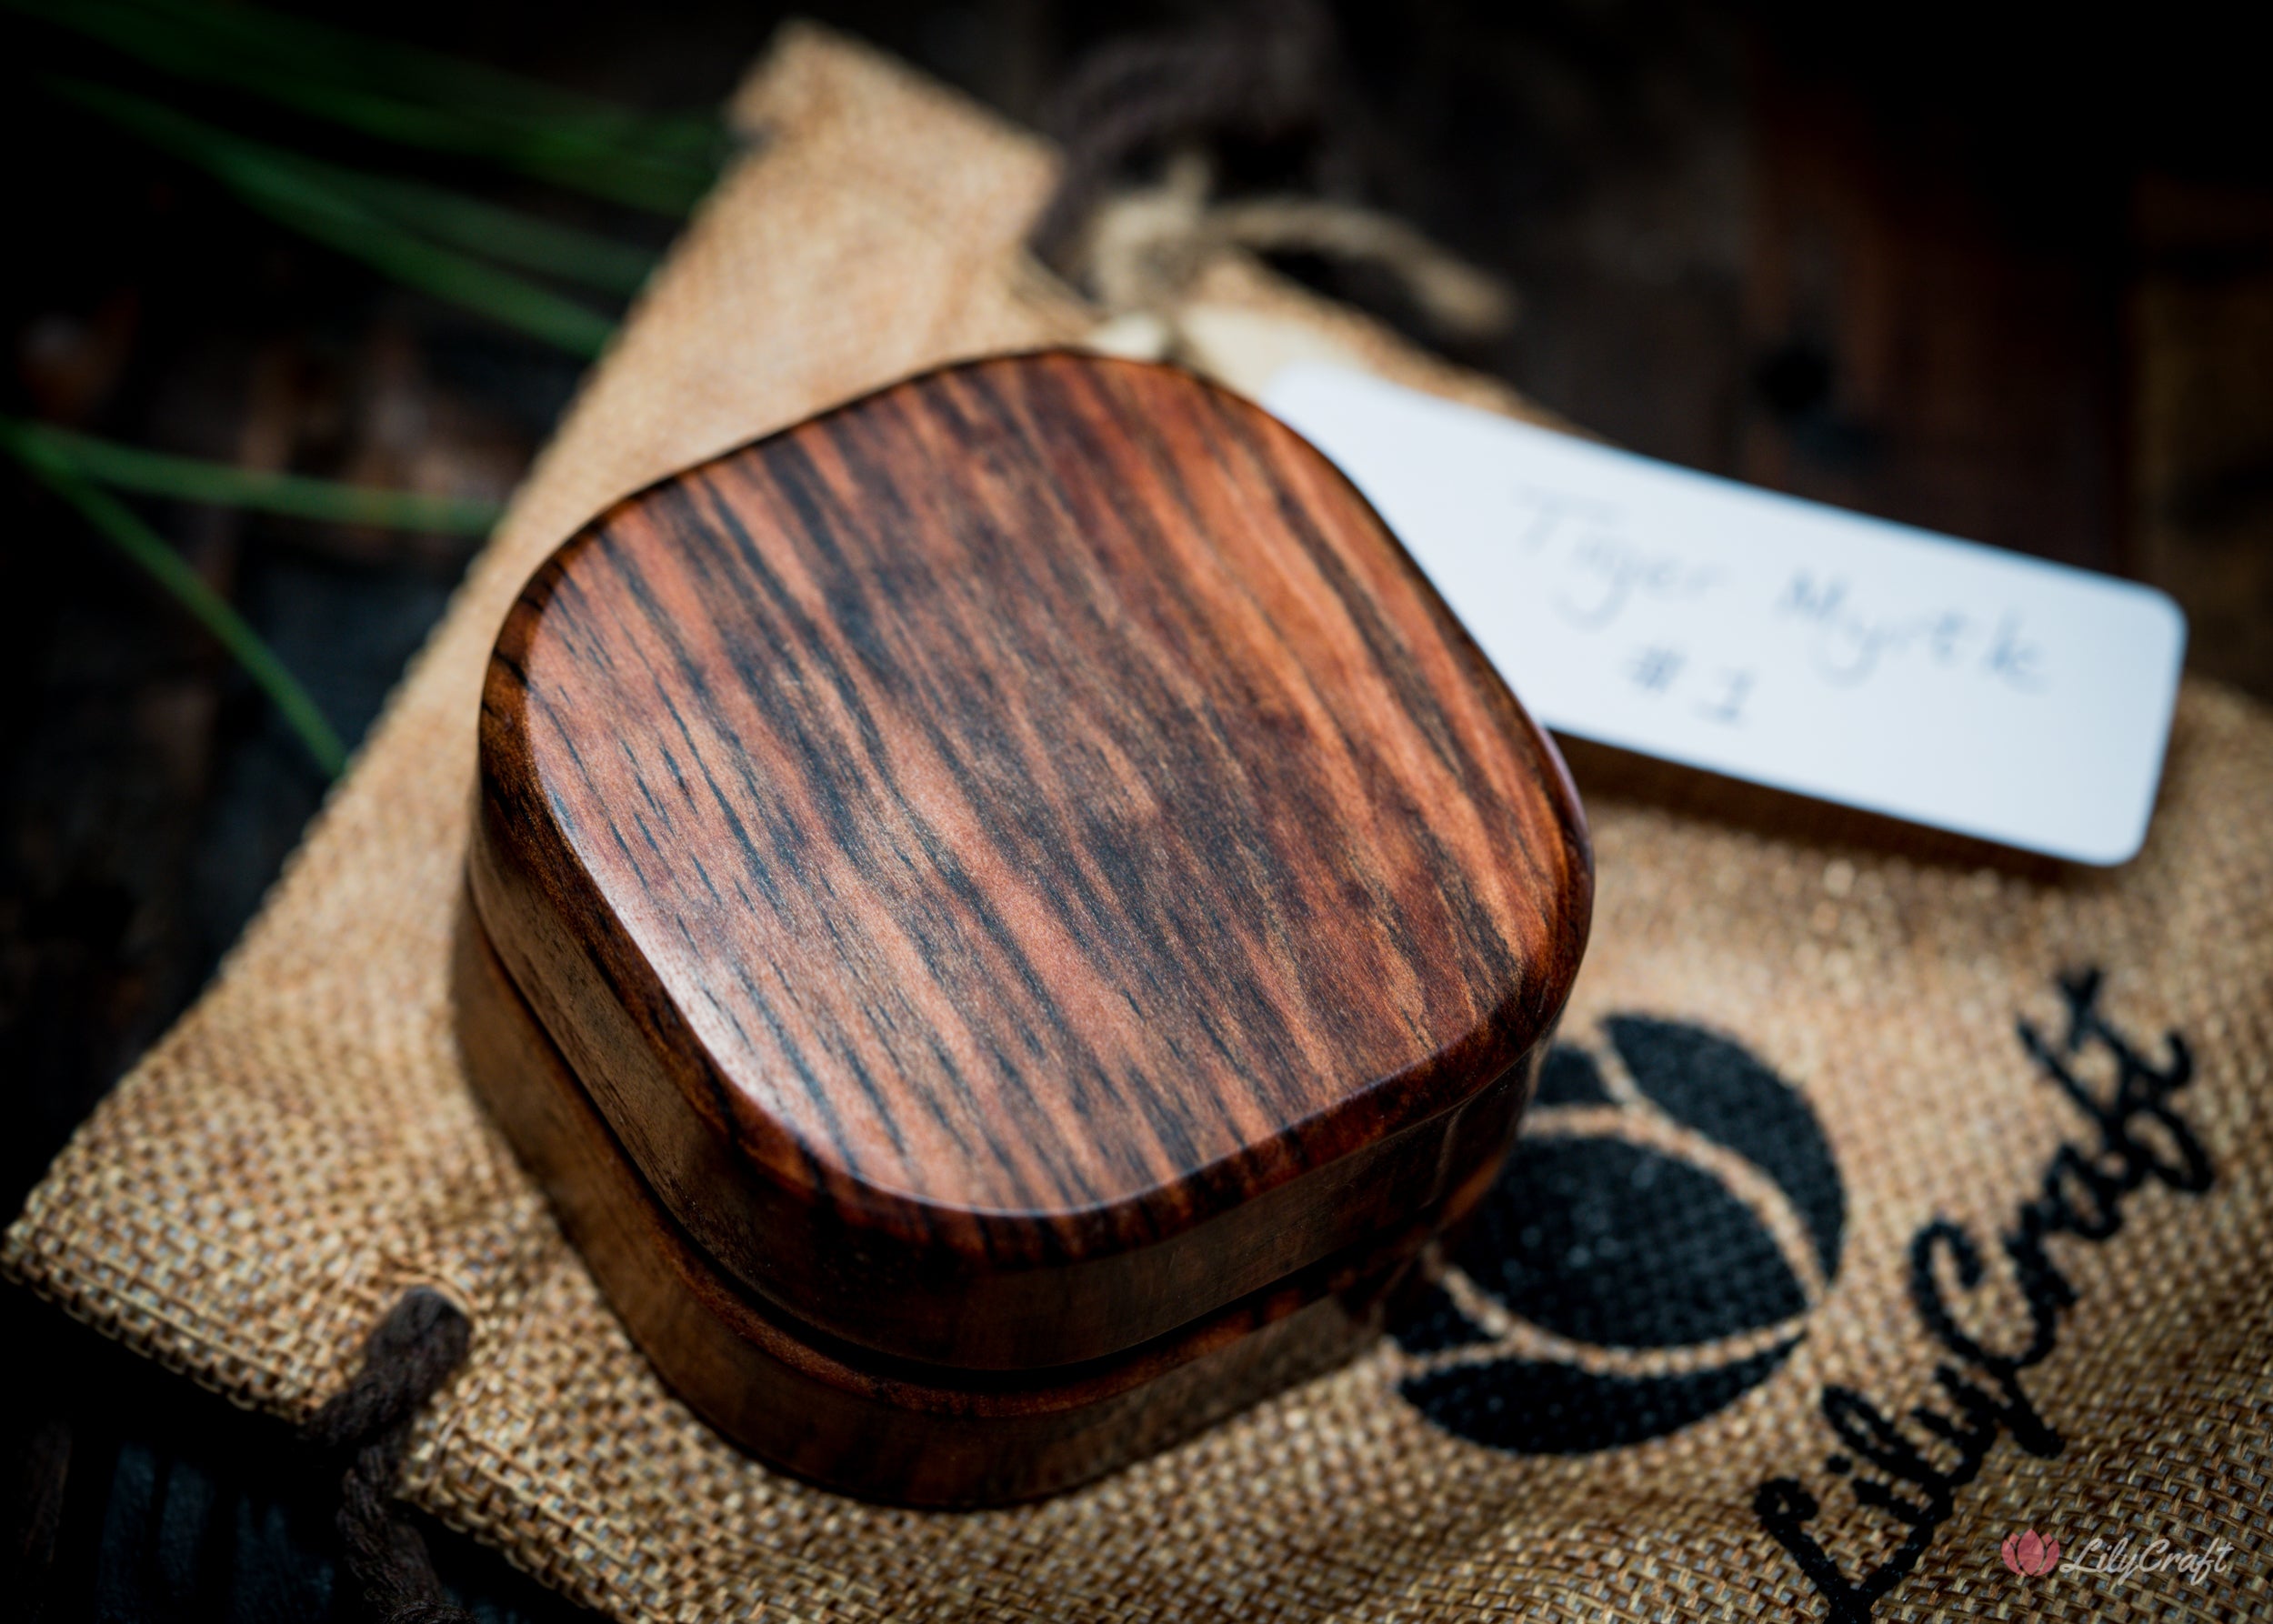 Exotic wood compass in a polished and elegant design.